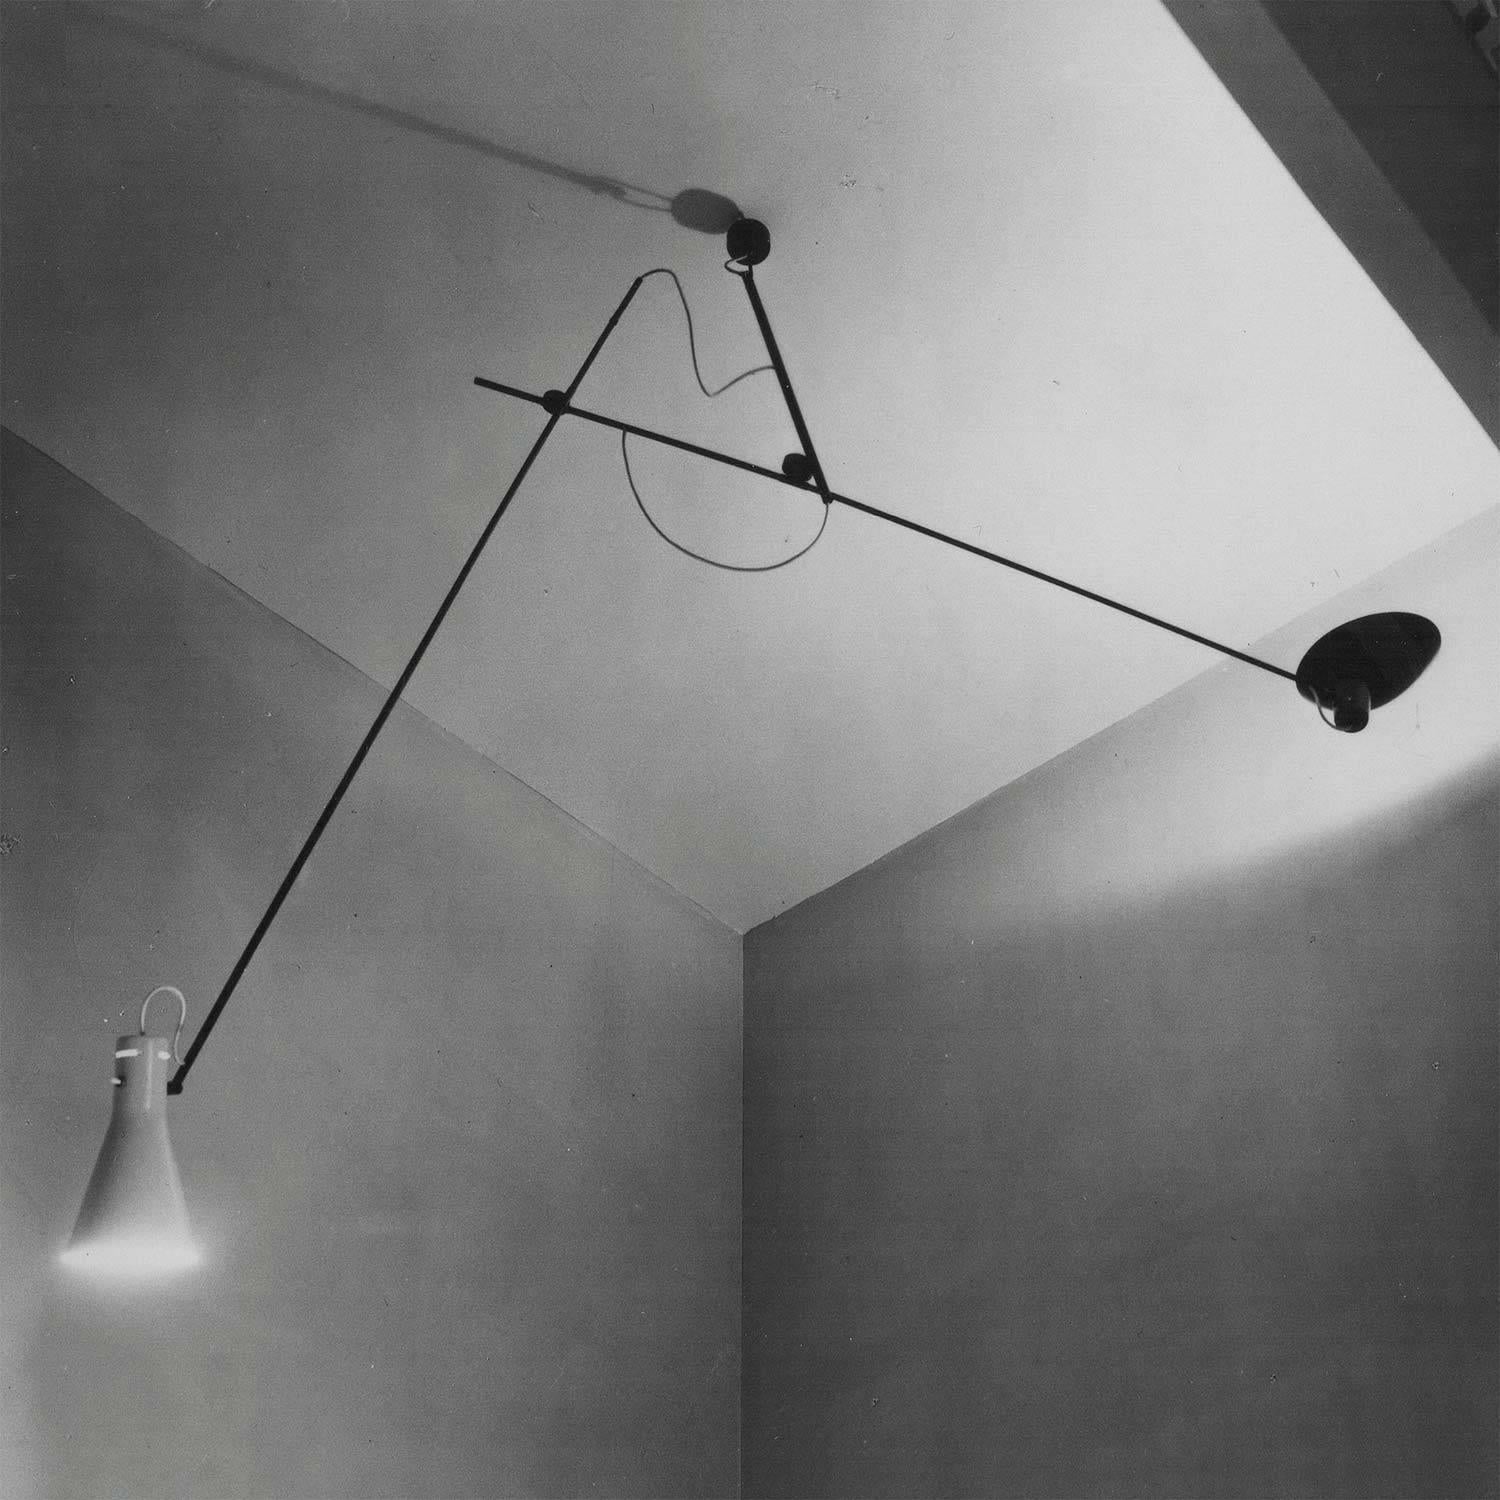 Vittoriano Viganò special mondrian edition 'VV suspension' lamp for Astep. 

Viganò was the art director of Arteluce, the company founded by his creative partner Gino Sarfatti, and the visor was one of his most celebrated design series. Designed